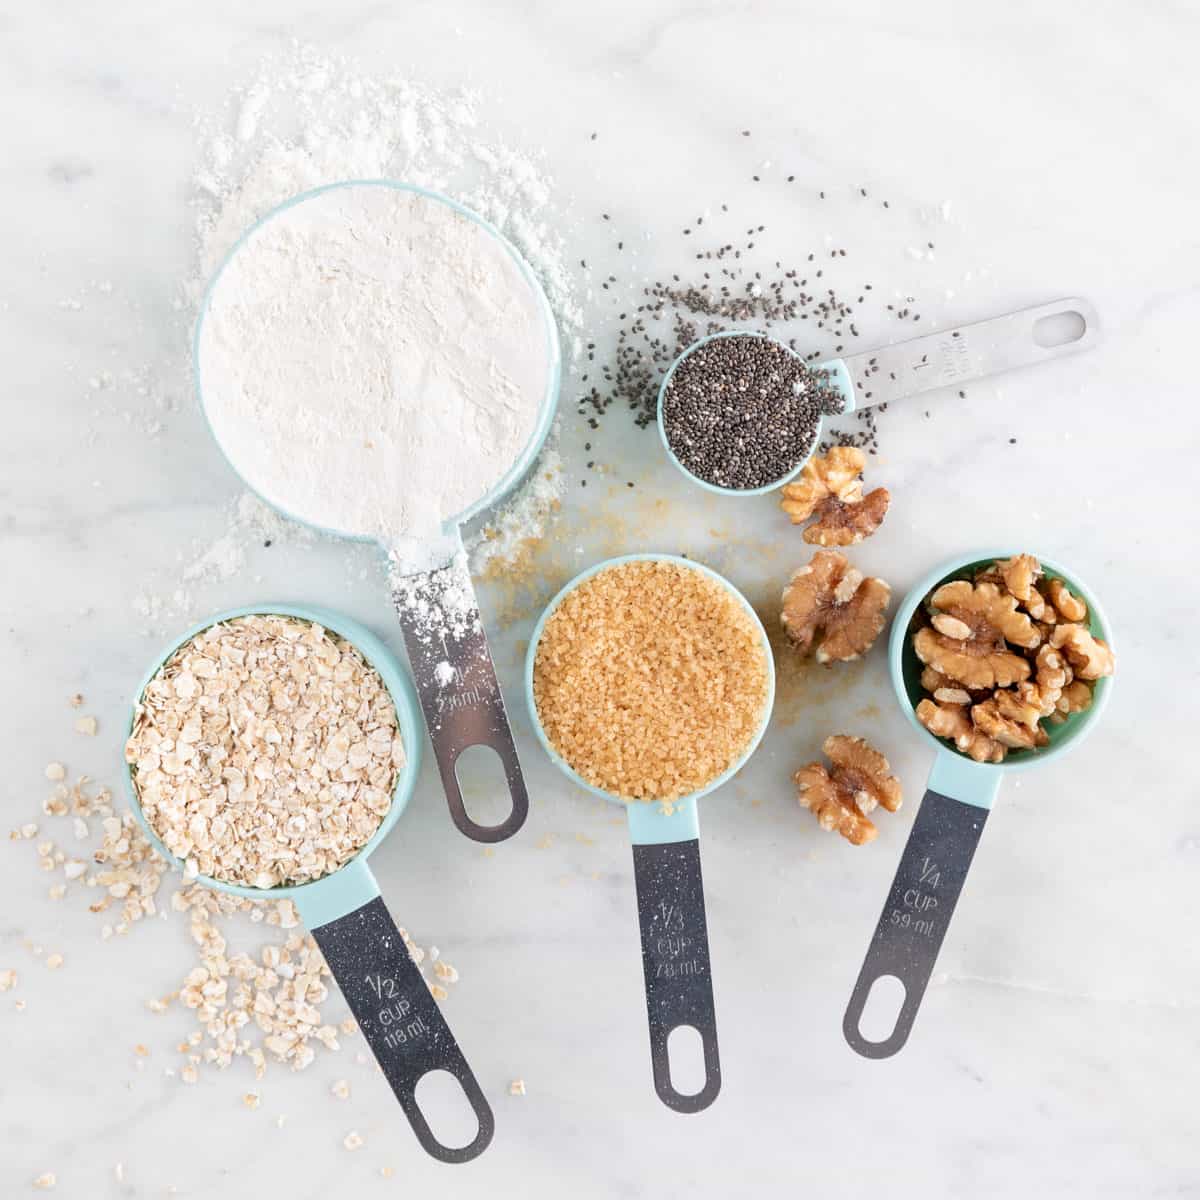 How to Measure Ingredients for Baking Success